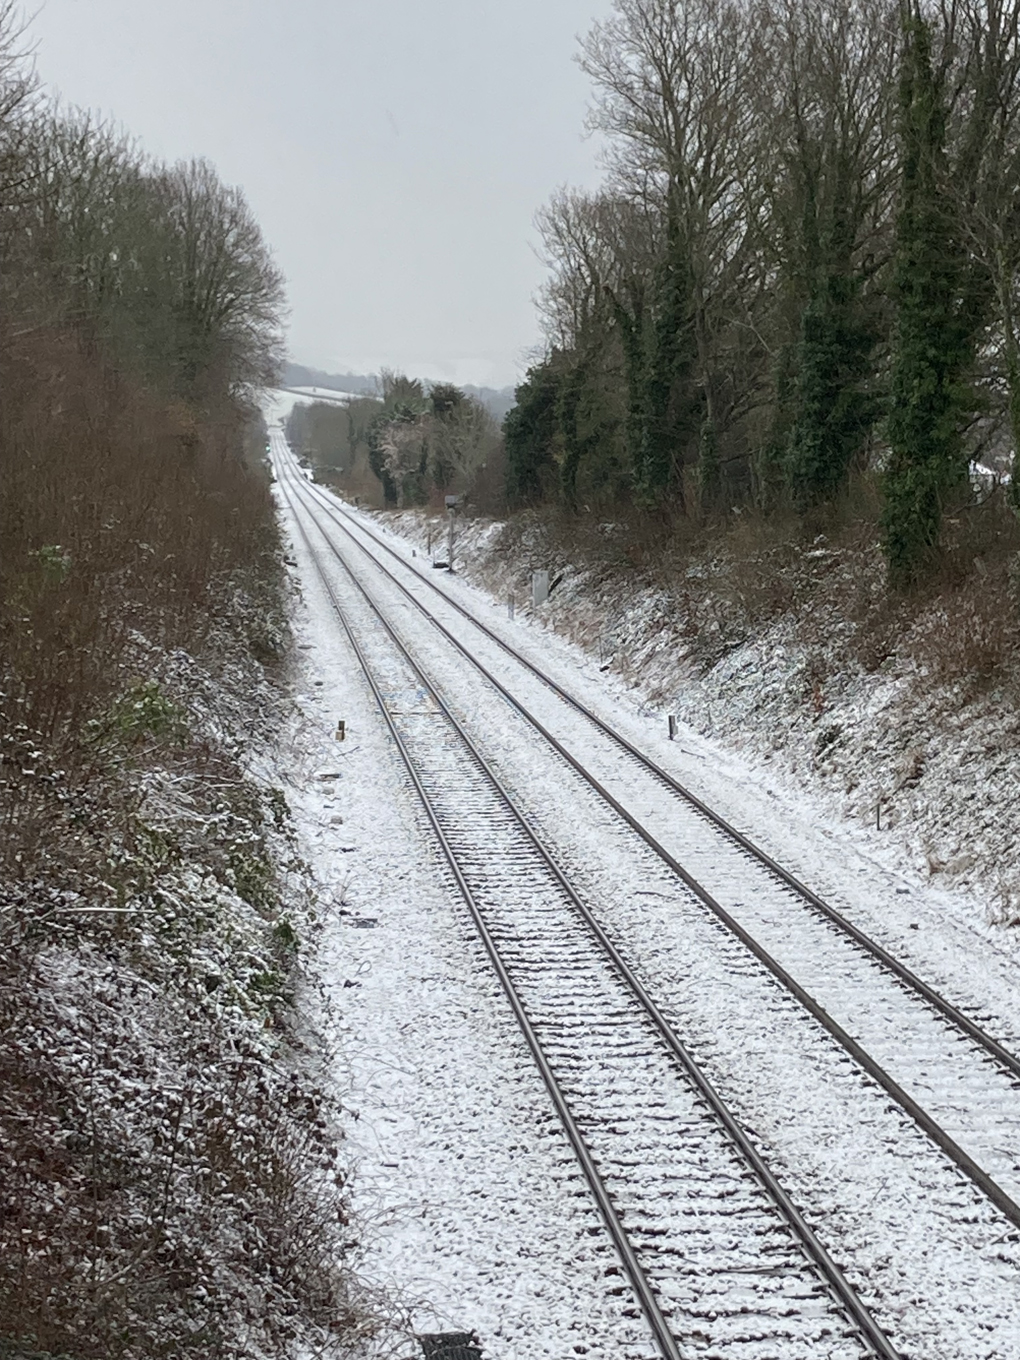 We see a picture of snow on railway tracks emerging from a bridge